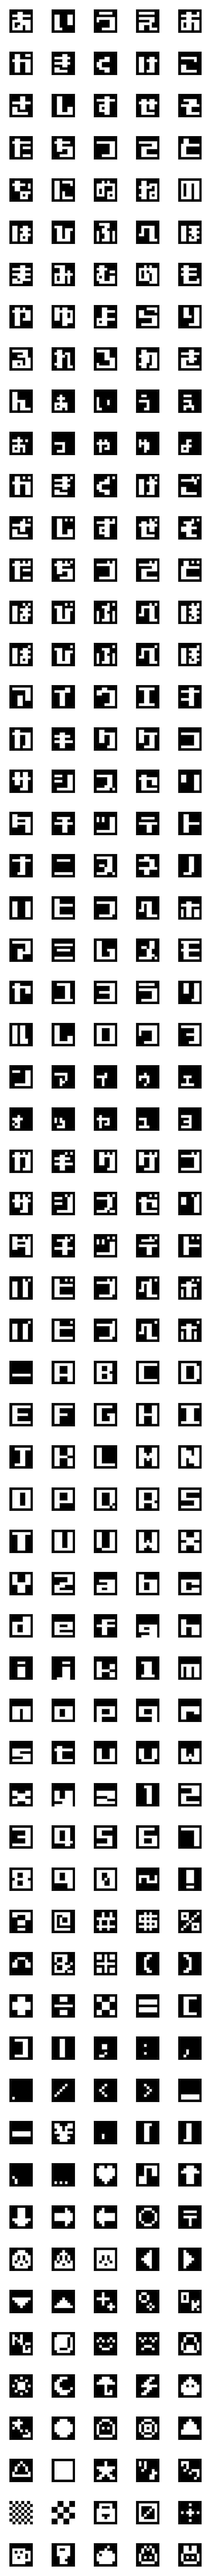 [LINE絵文字]8ドットフォント+絵文字【白黒】の画像一覧